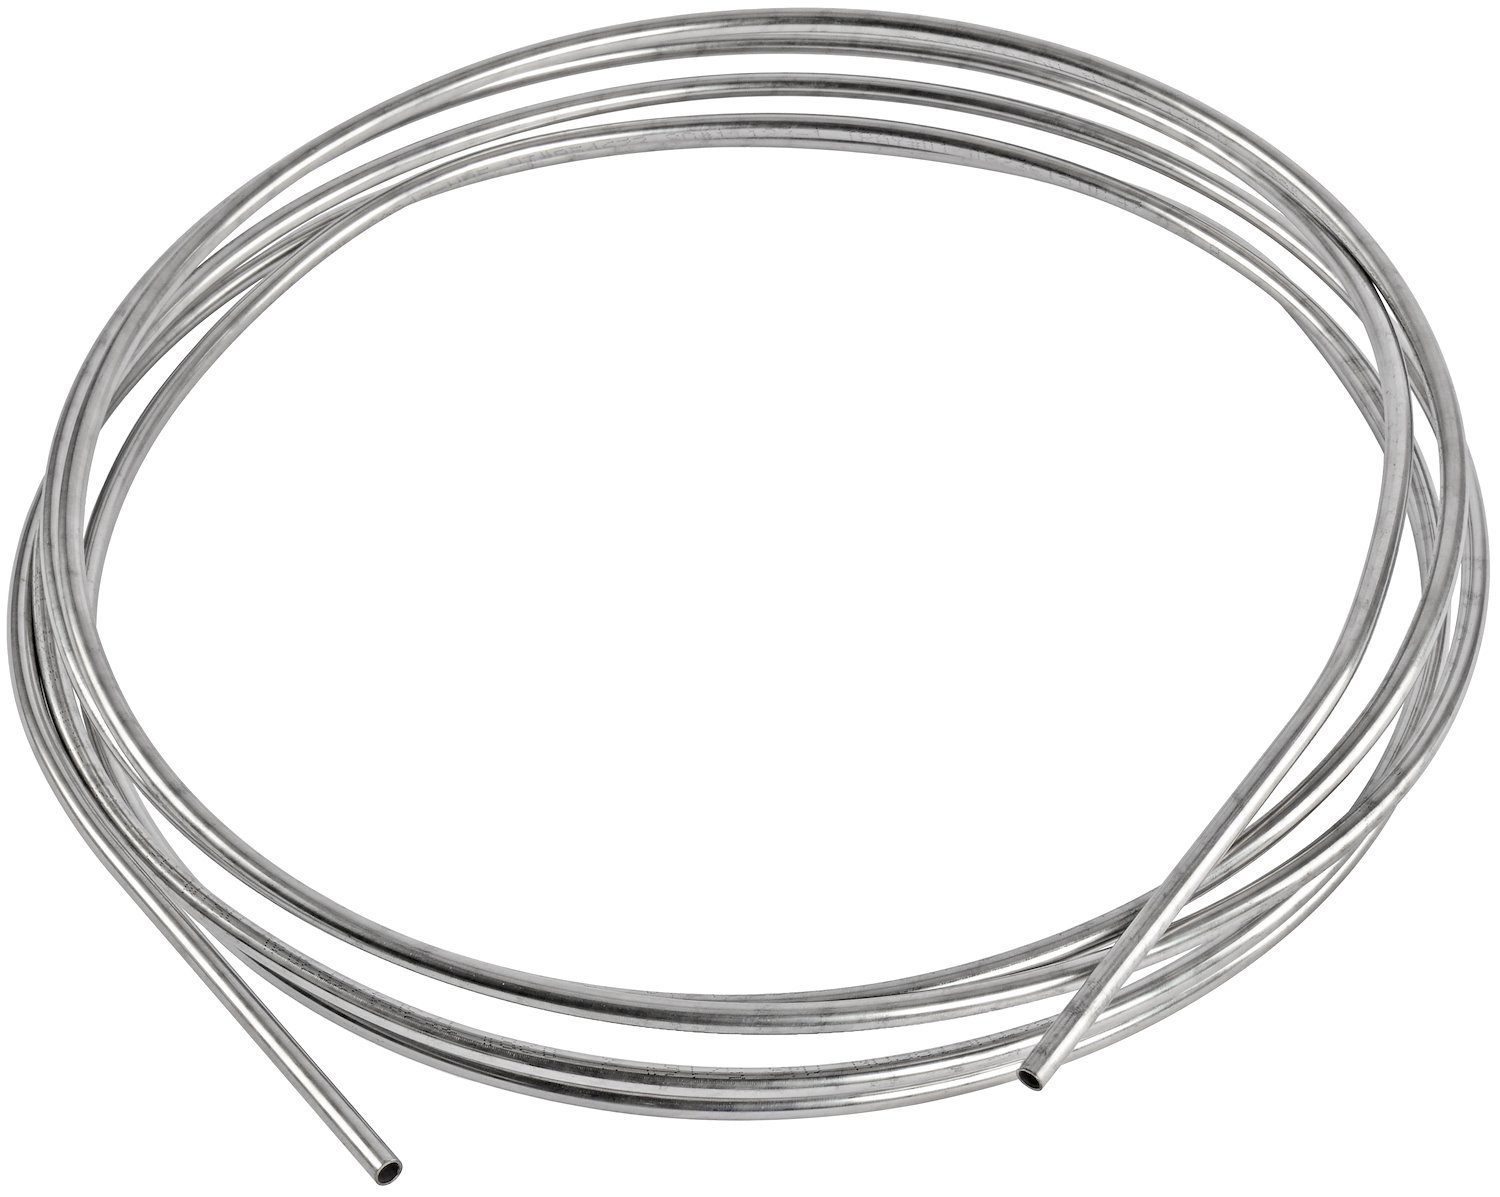 Stainless Steel Fuel Line Coil 3/8" O.D. x 0.028" Wall